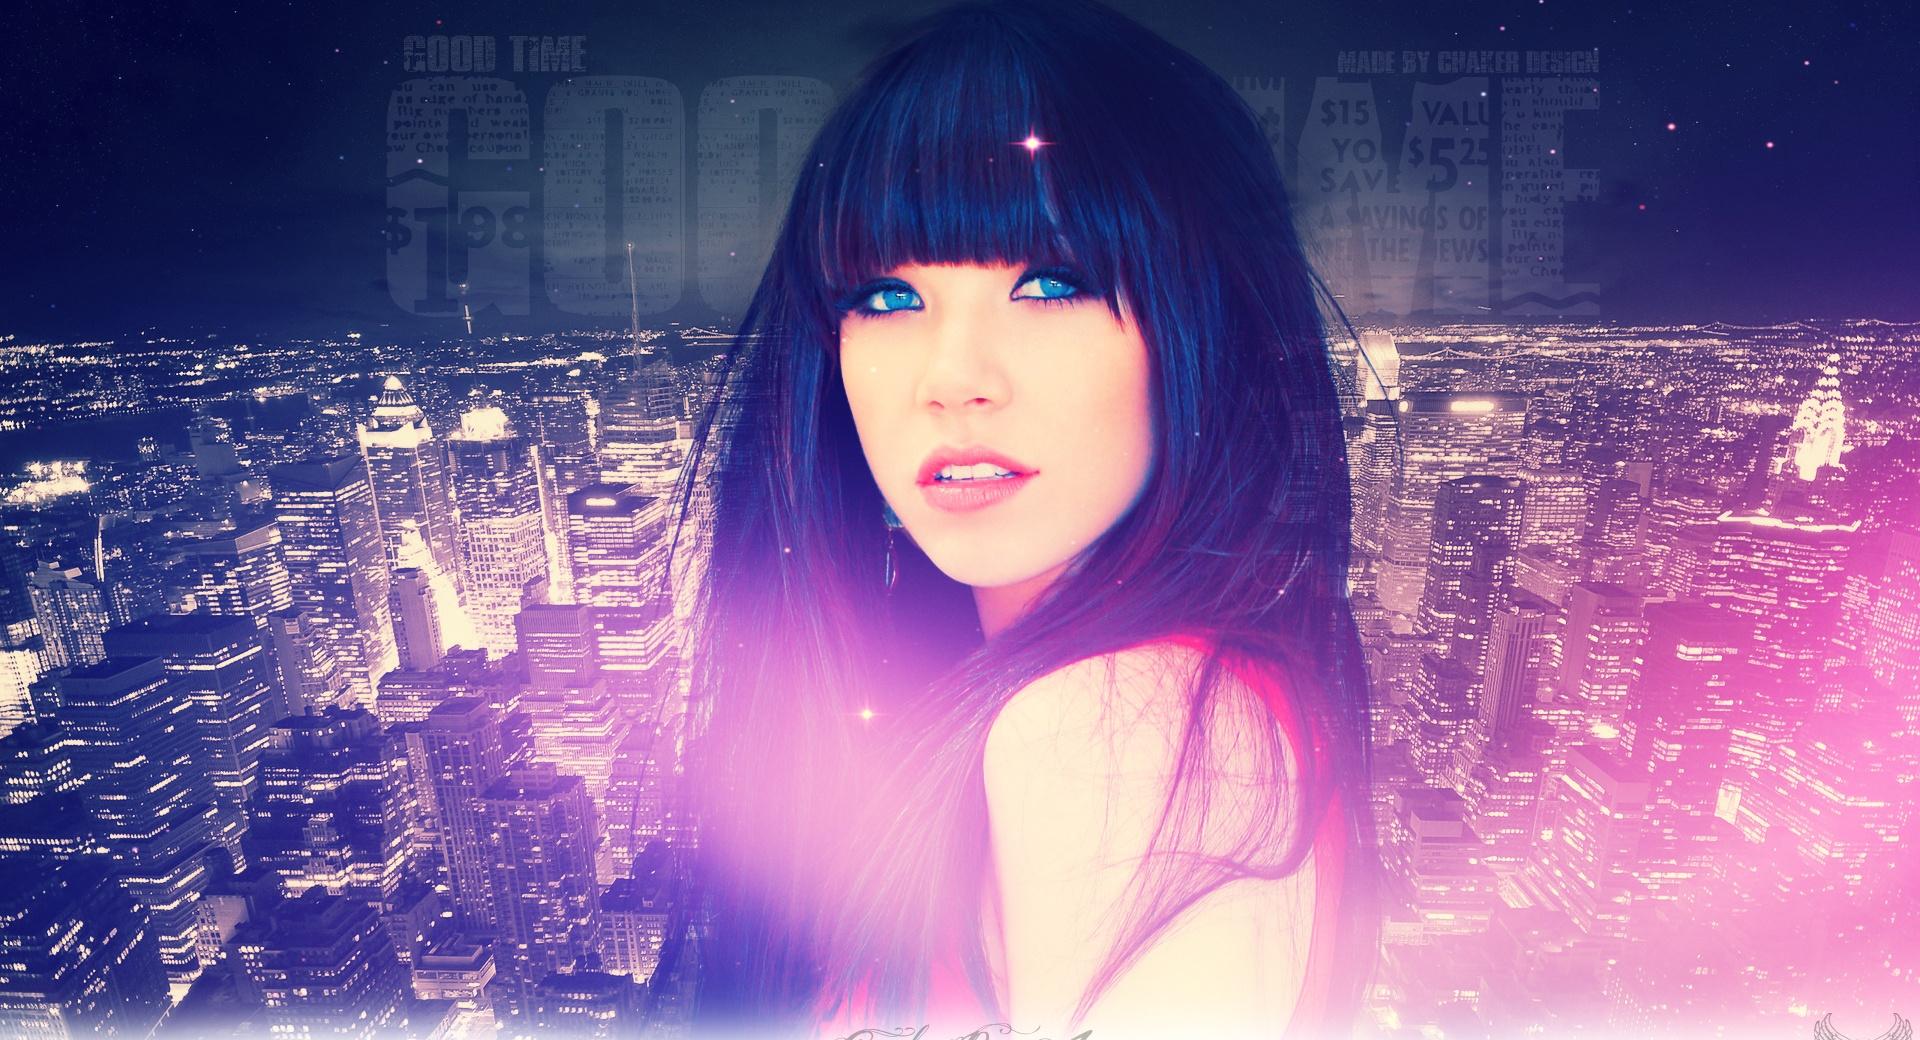 Carly Rae Japsen - Good Times wallpapers HD quality